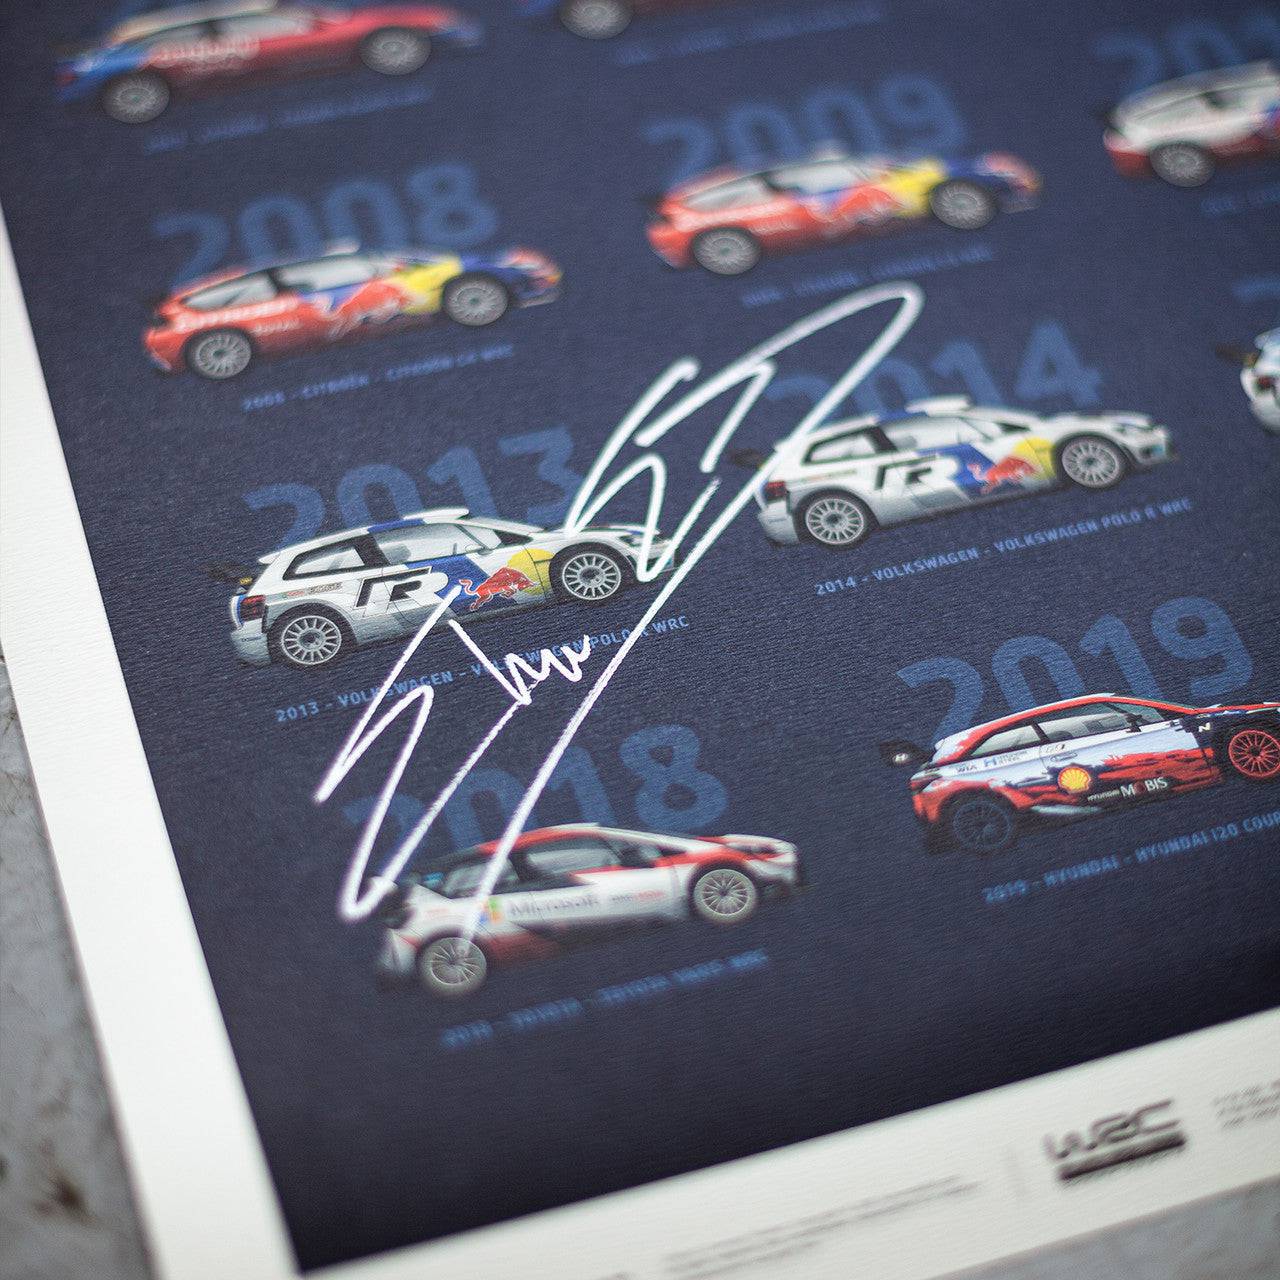 Elfyn Evans - WRC Manufacturers’ Champions 1973-2020 - 48th Anniversary | Signed Limited Edition